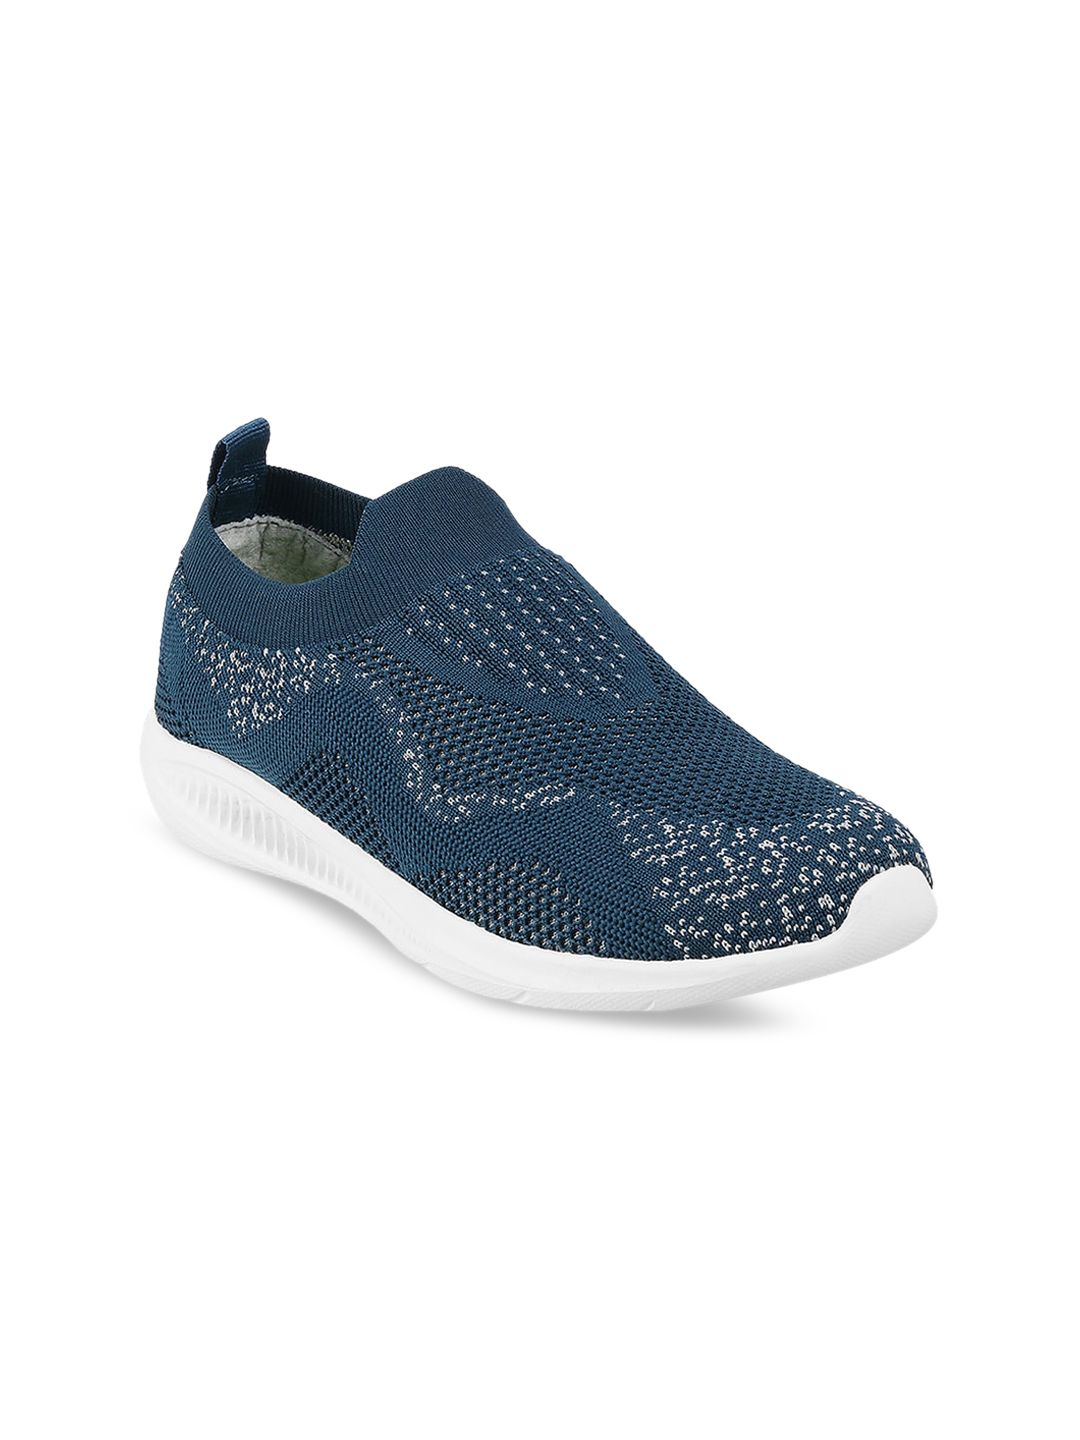 ACTIV Women Blue Woven Design Slip-On Sneakers Price in India